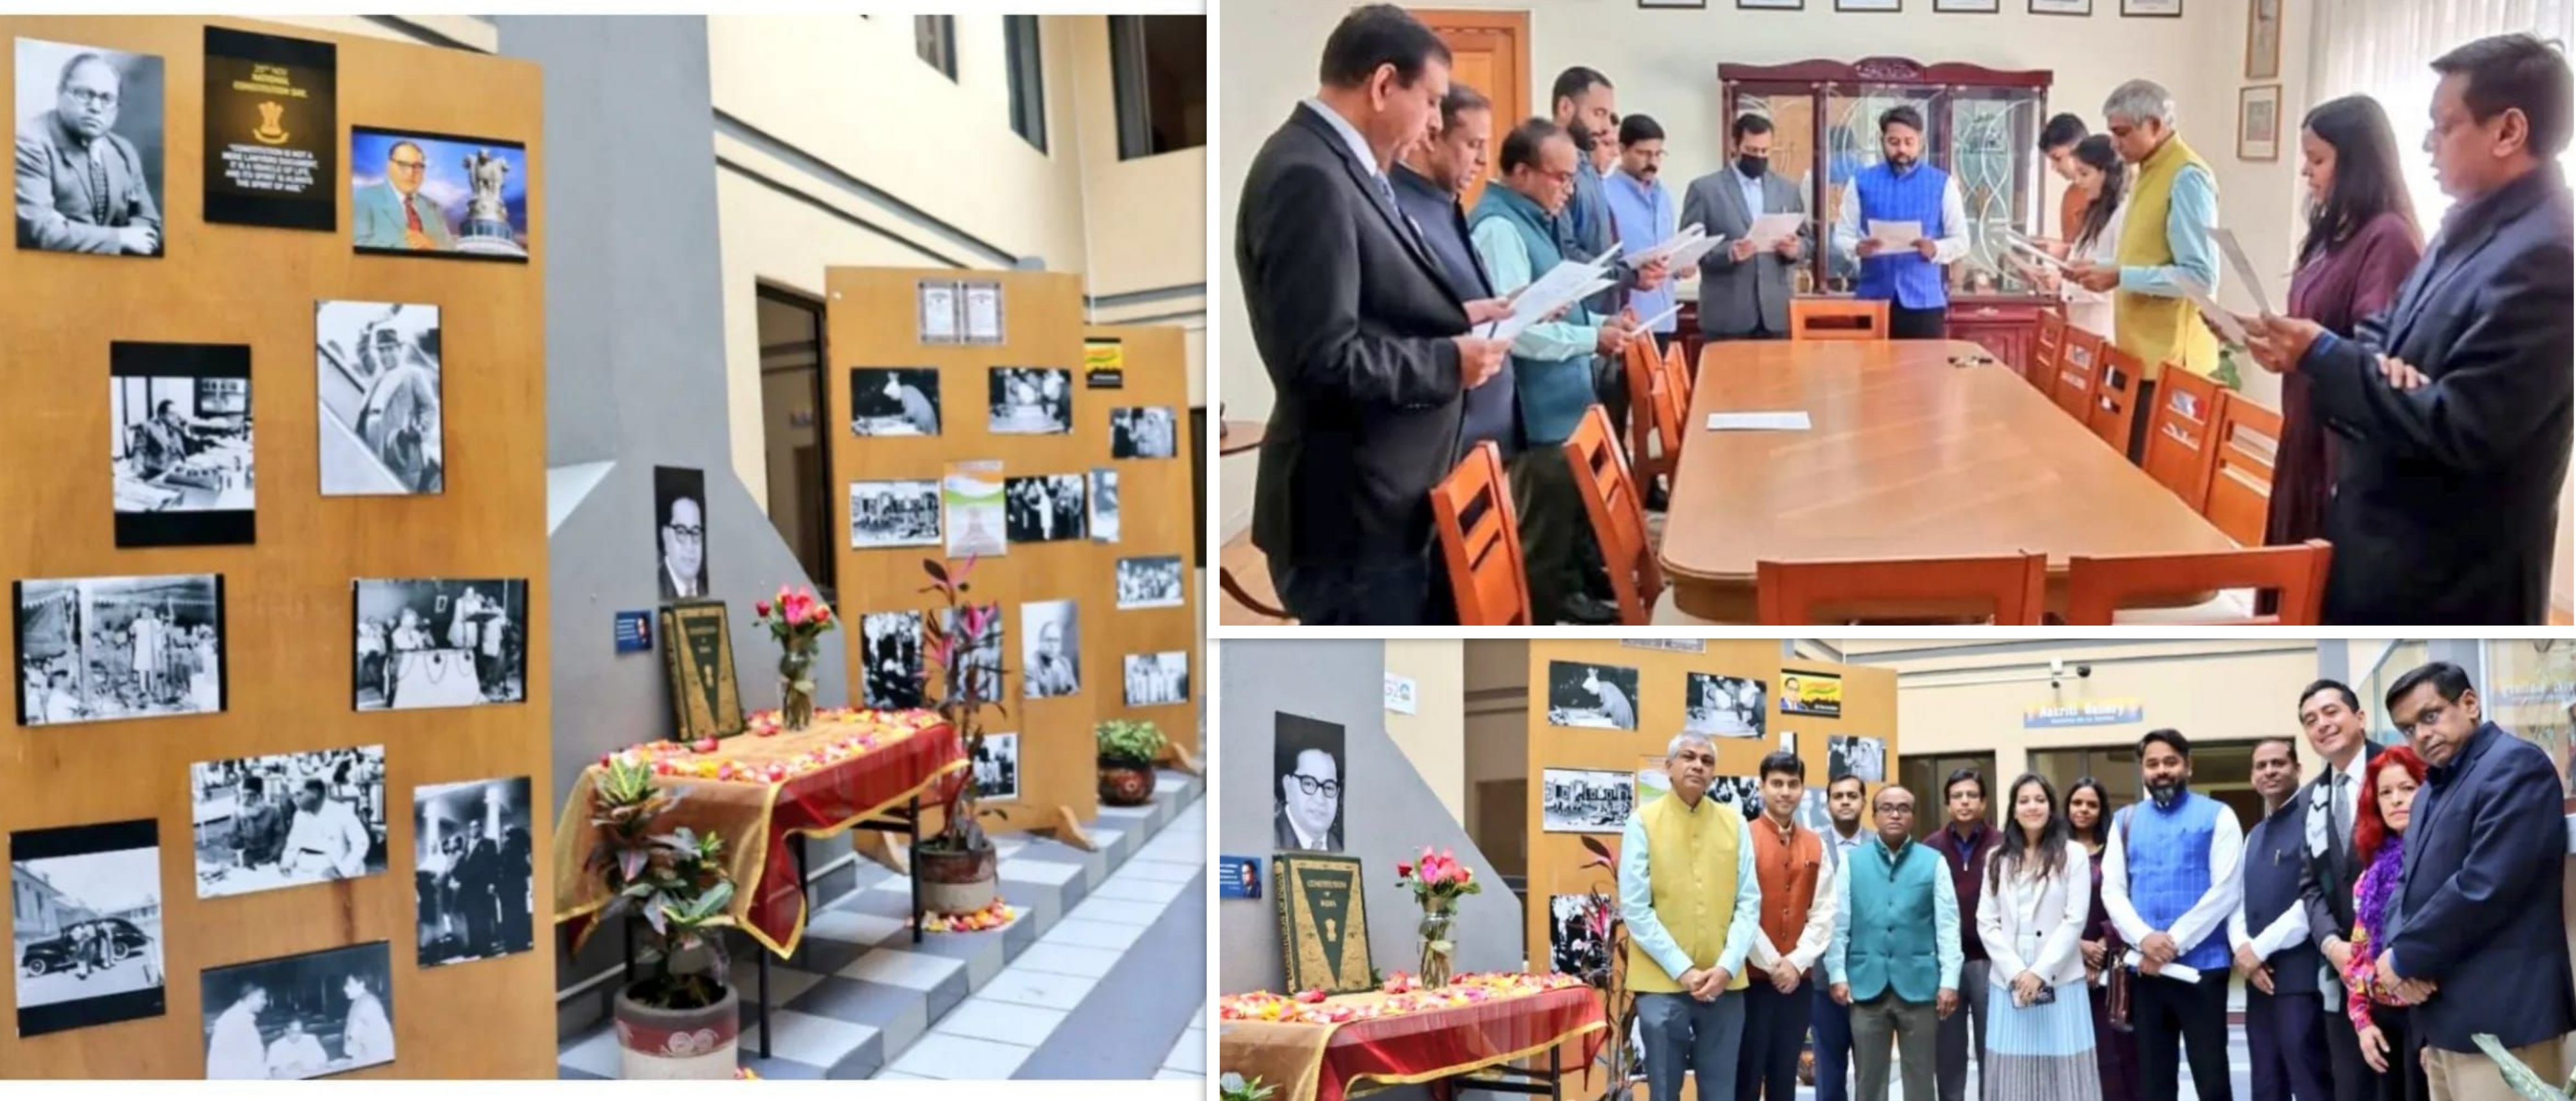  <div style="fcolor: #fff; font-weight: 600; font-size: 1.5em;">
<p style="font-size: 13.8px;">On the auspicious occasion of India's 73rd Constitution Day, Ambassador Pankaj Sharma & Embassy officials read its Preamble & reiterated commitment to fundamental values of democratic nation as laid in our samvidhan.

This was followed by a photo exhibition organized by Gurudev Tagore Indian Cultural Centre. 
<br /><span style="text-align: center;">26 November 2022</span></p>
</div>